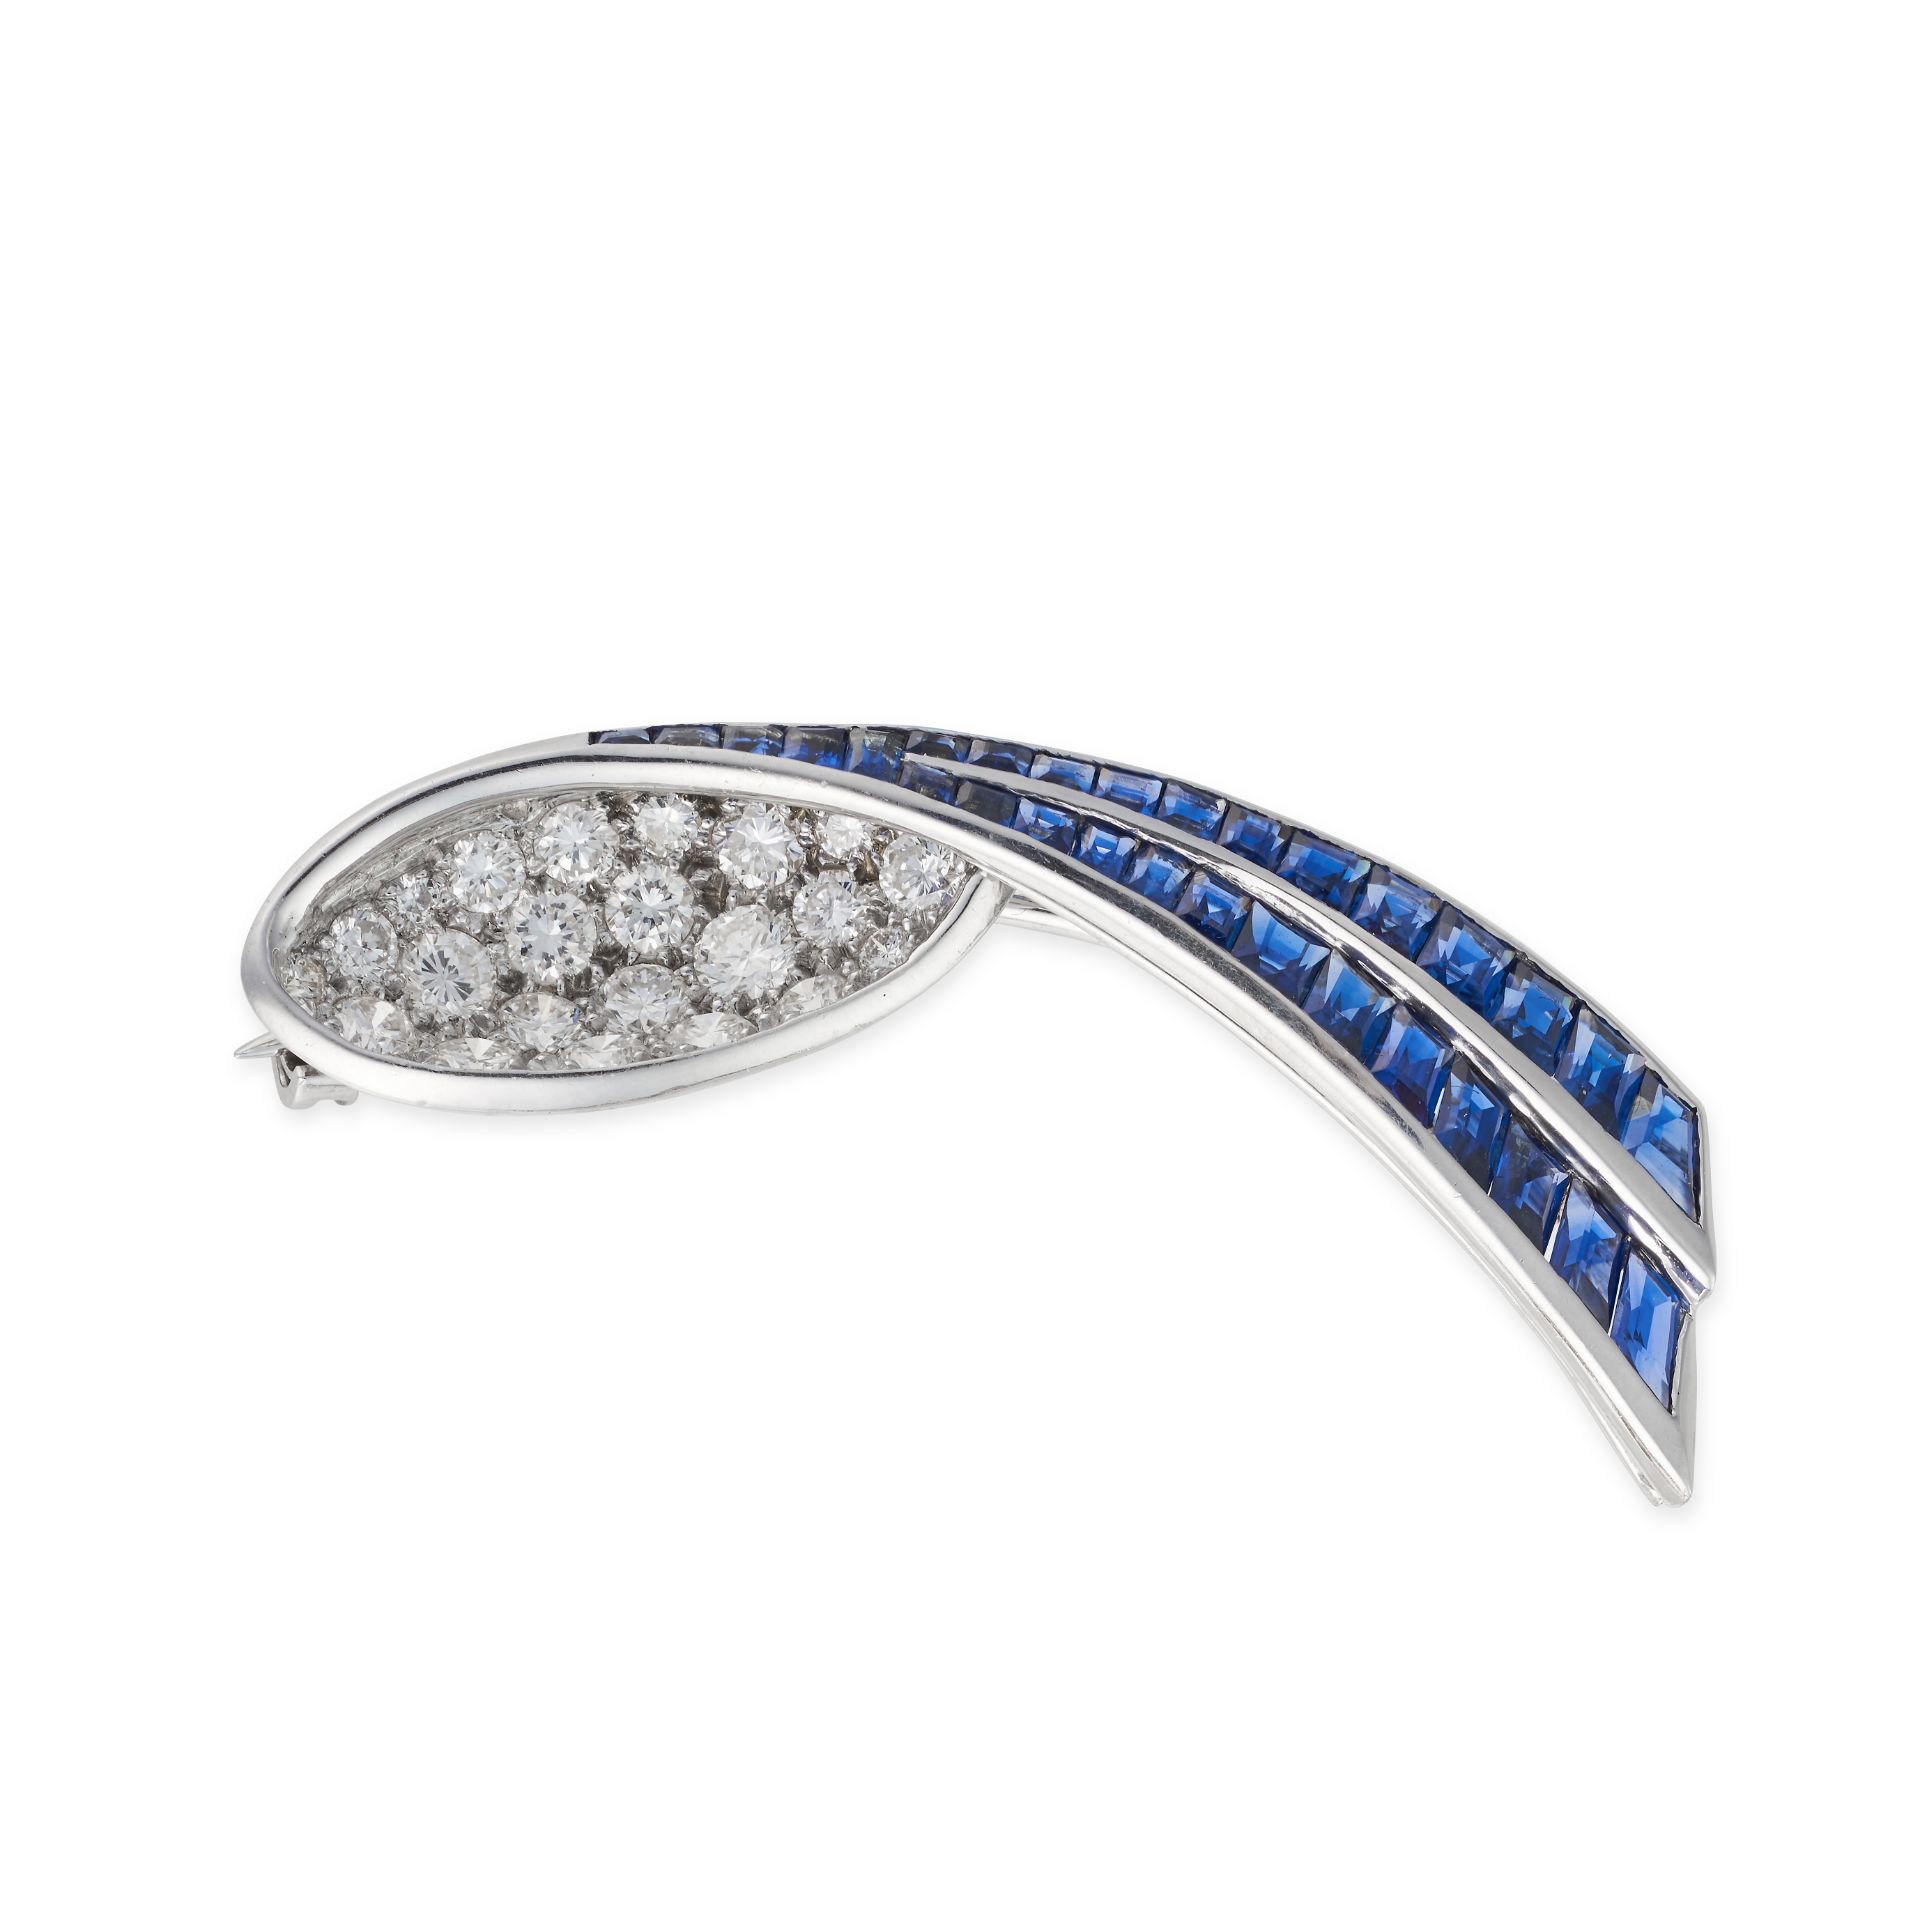 A SAPPHIRE AND DIAMOND SPRAY BROOCH in 18ct white gold, set with round brilliant cut diamonds and...